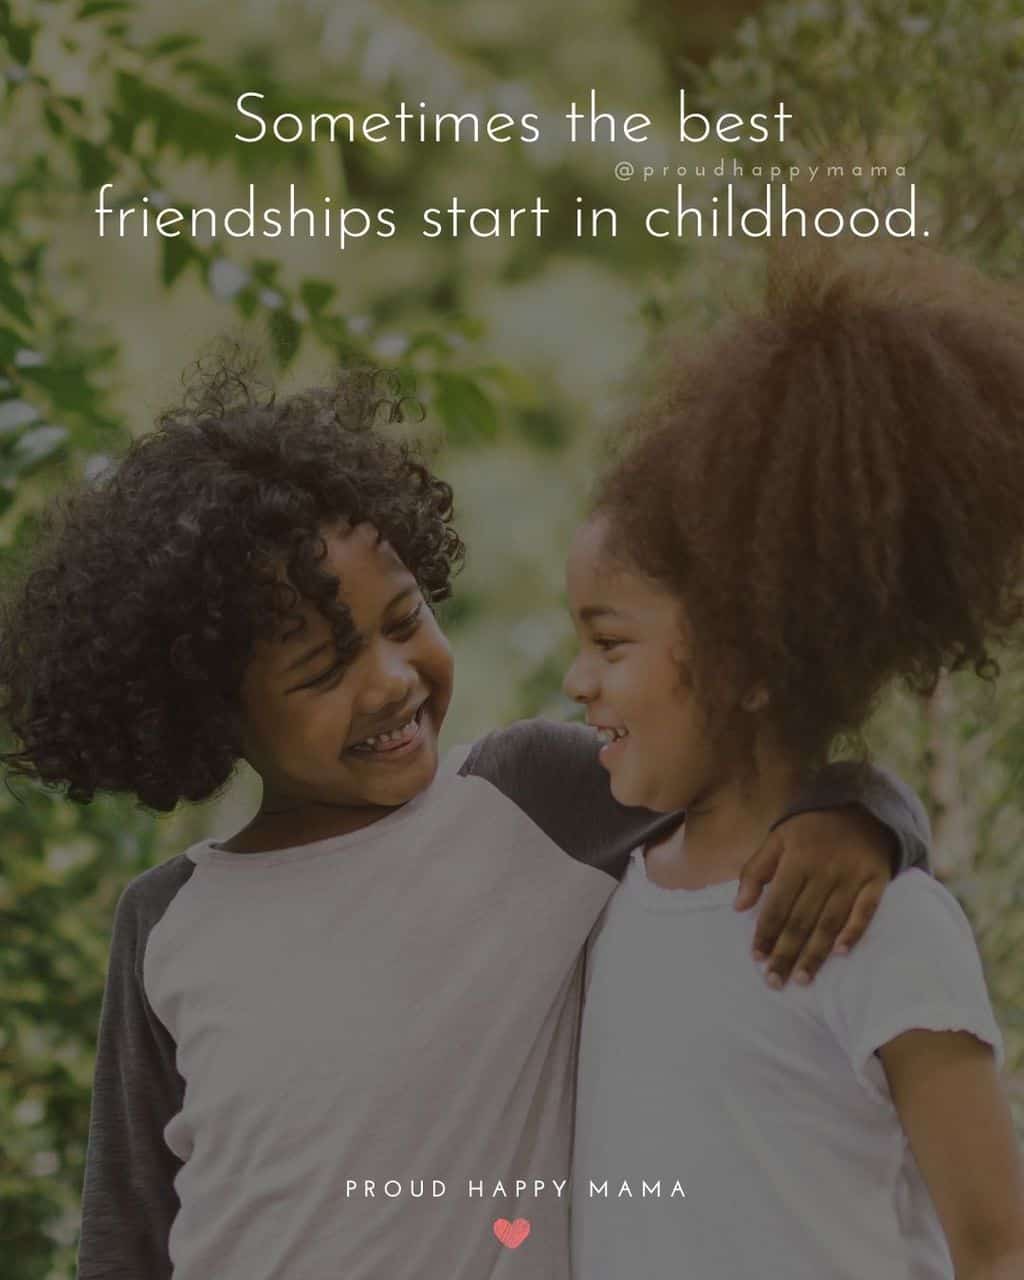 75+ BEST Quotes About Childhood Friends & Friendship [With Images]